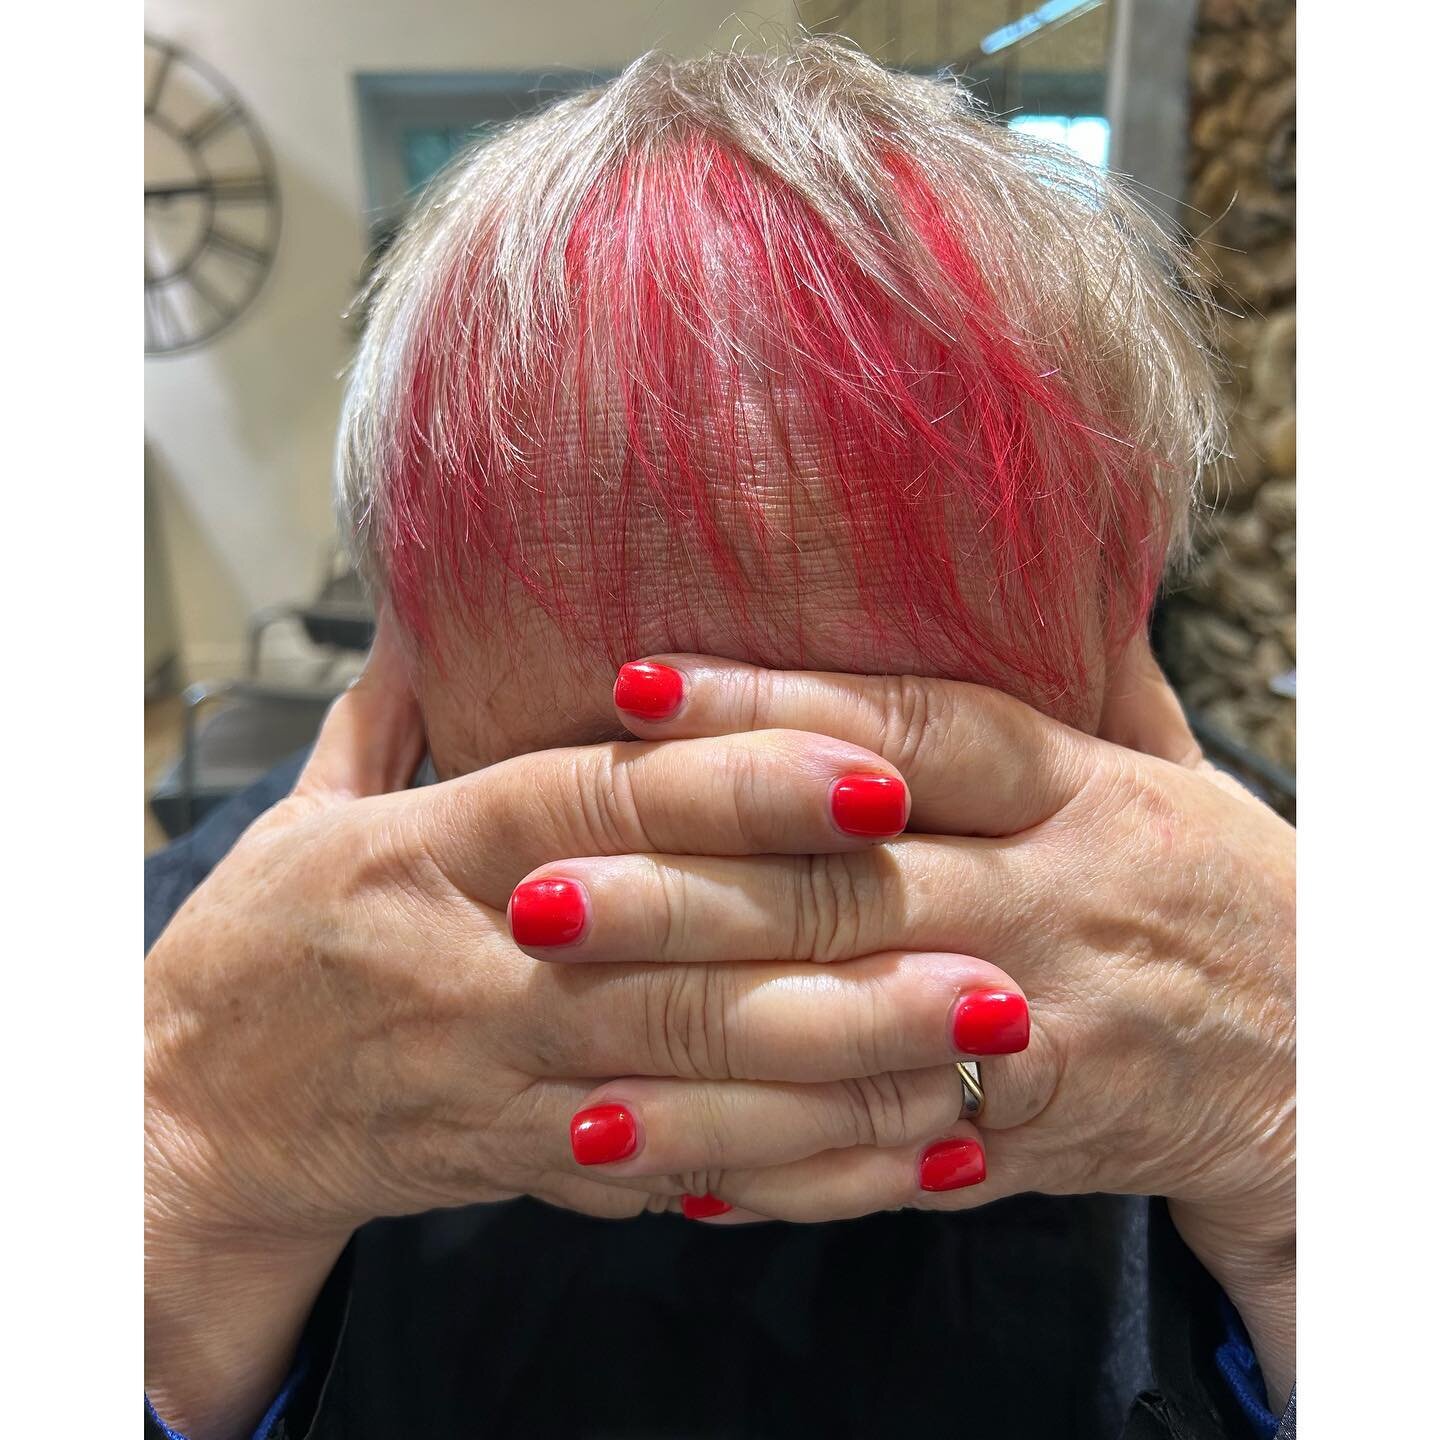 ❤️If your hair can&rsquo;t match your nails at 80 then when can it?❤️ #hair #hairdresser #hairsalon #matching #hairtutorial #redhair #rednails #red #hairfashion #hairgoals #hairbrained #hairstylist #hairideas #hairart #hairlove #lovemyjob #funkyhair 